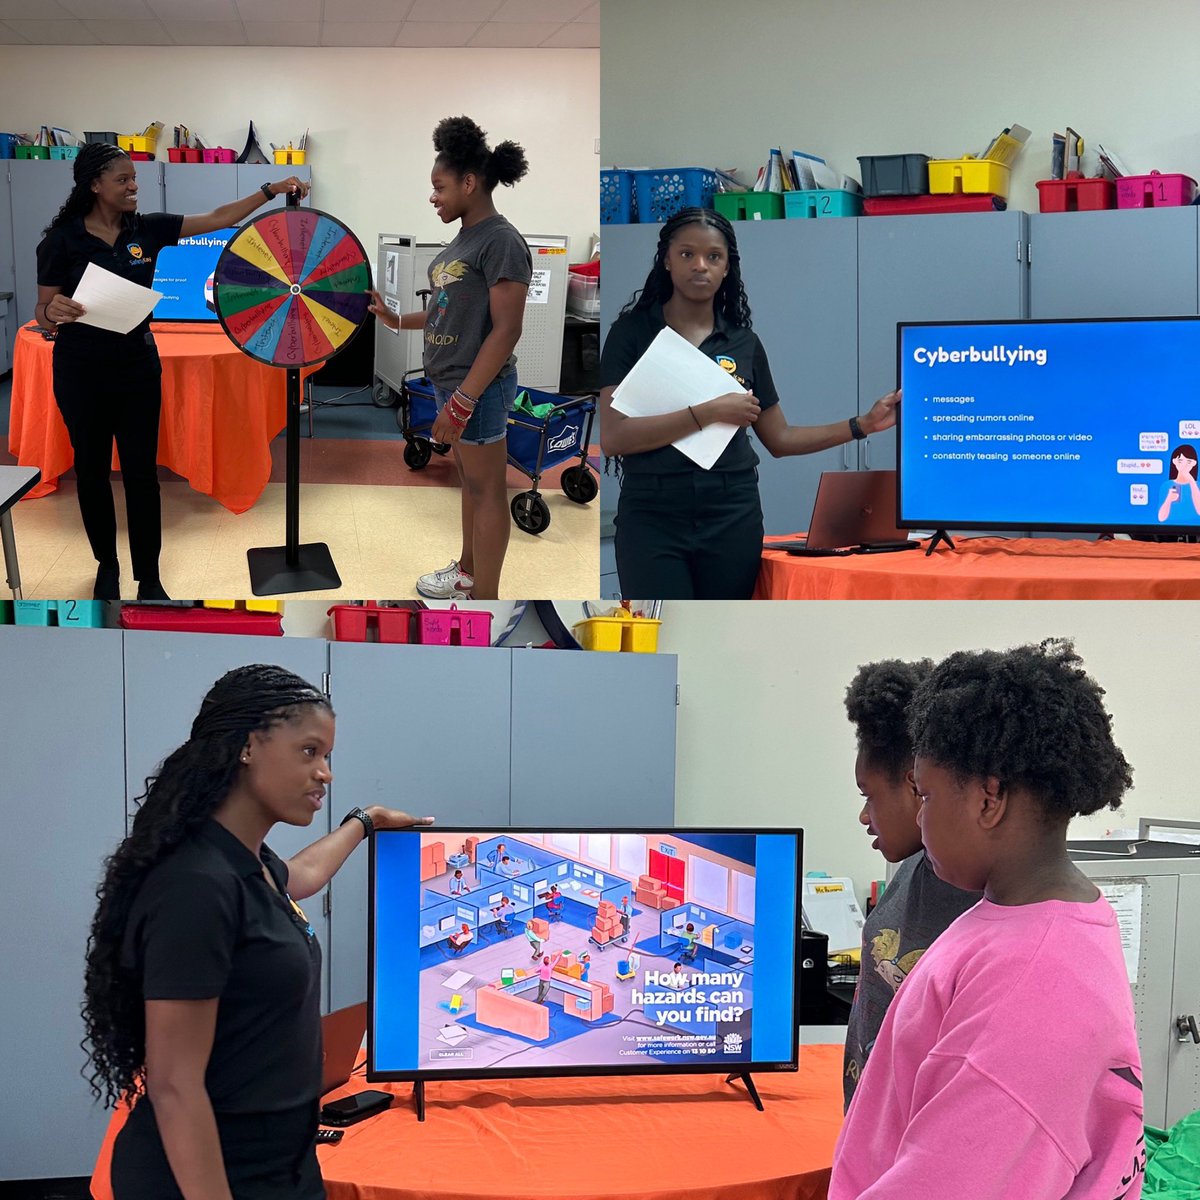 A special thank you to @safetykay_ for sharing safety tips about cyber bullying and how to stay safe with our Project Explore Jr summer campers! Thank you for sharing your professional journey with our scholars!